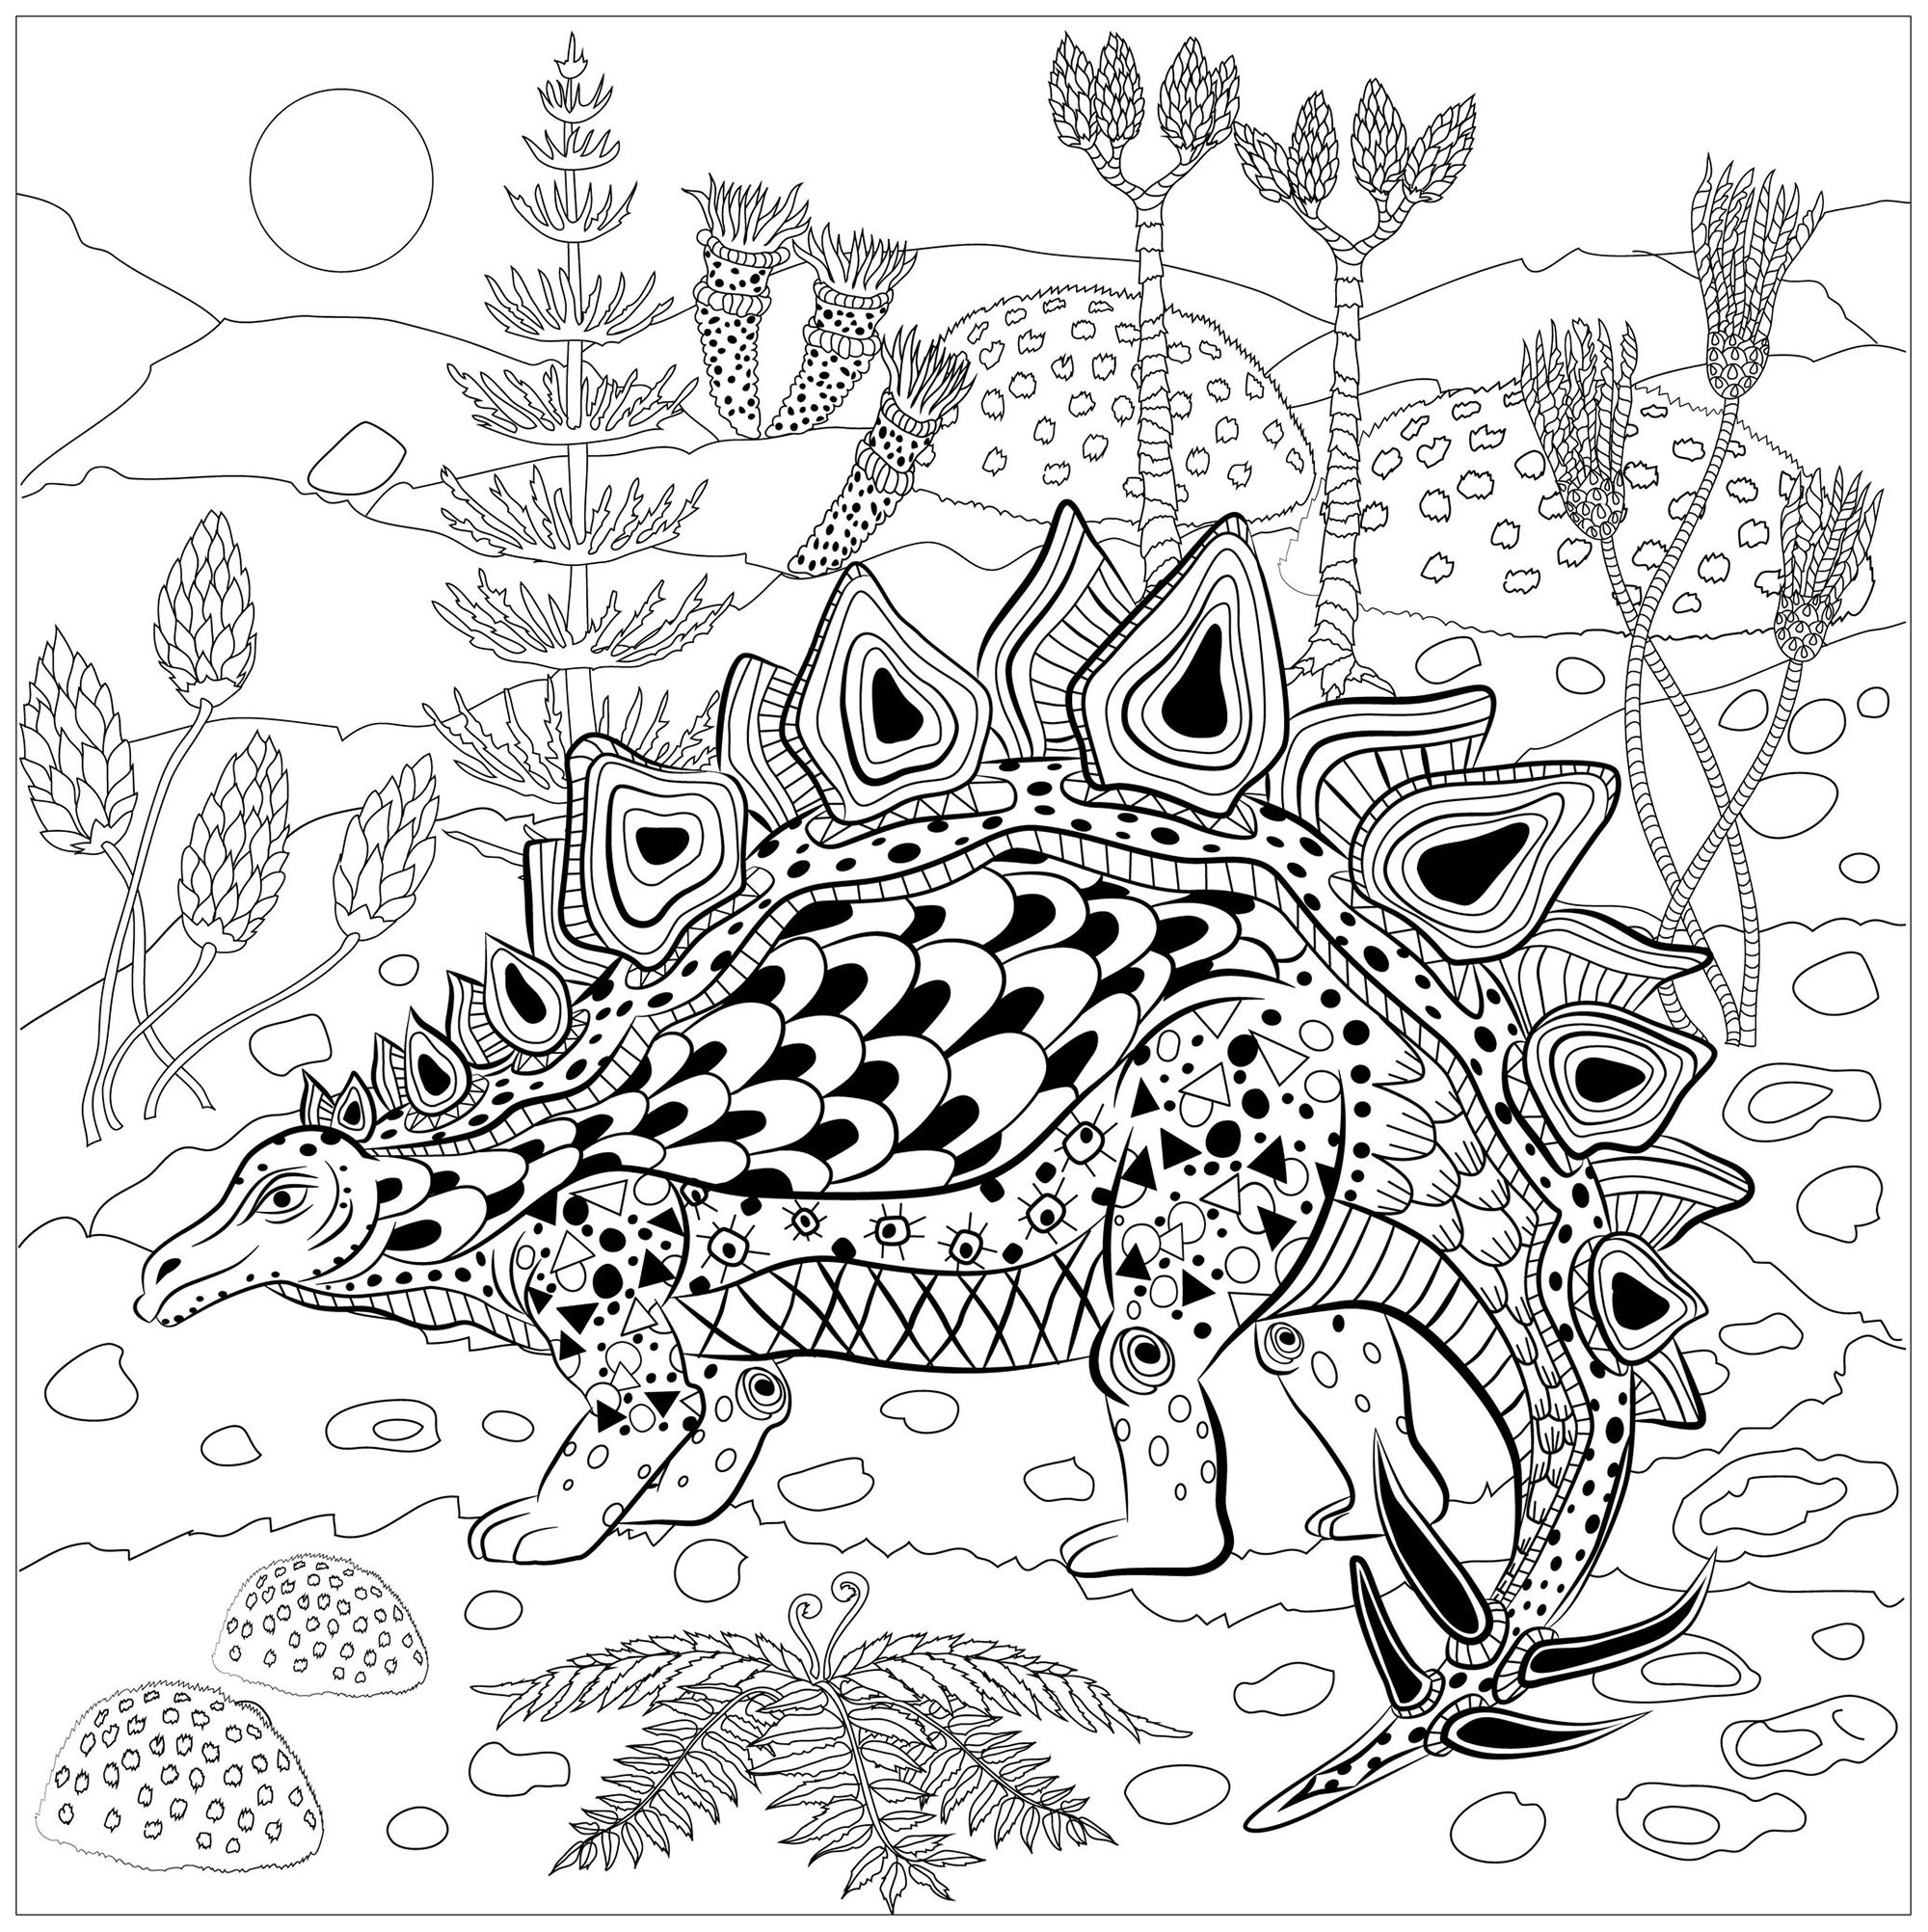 Stegosaurus in nature - Dinosaurs Adult Coloring Pages